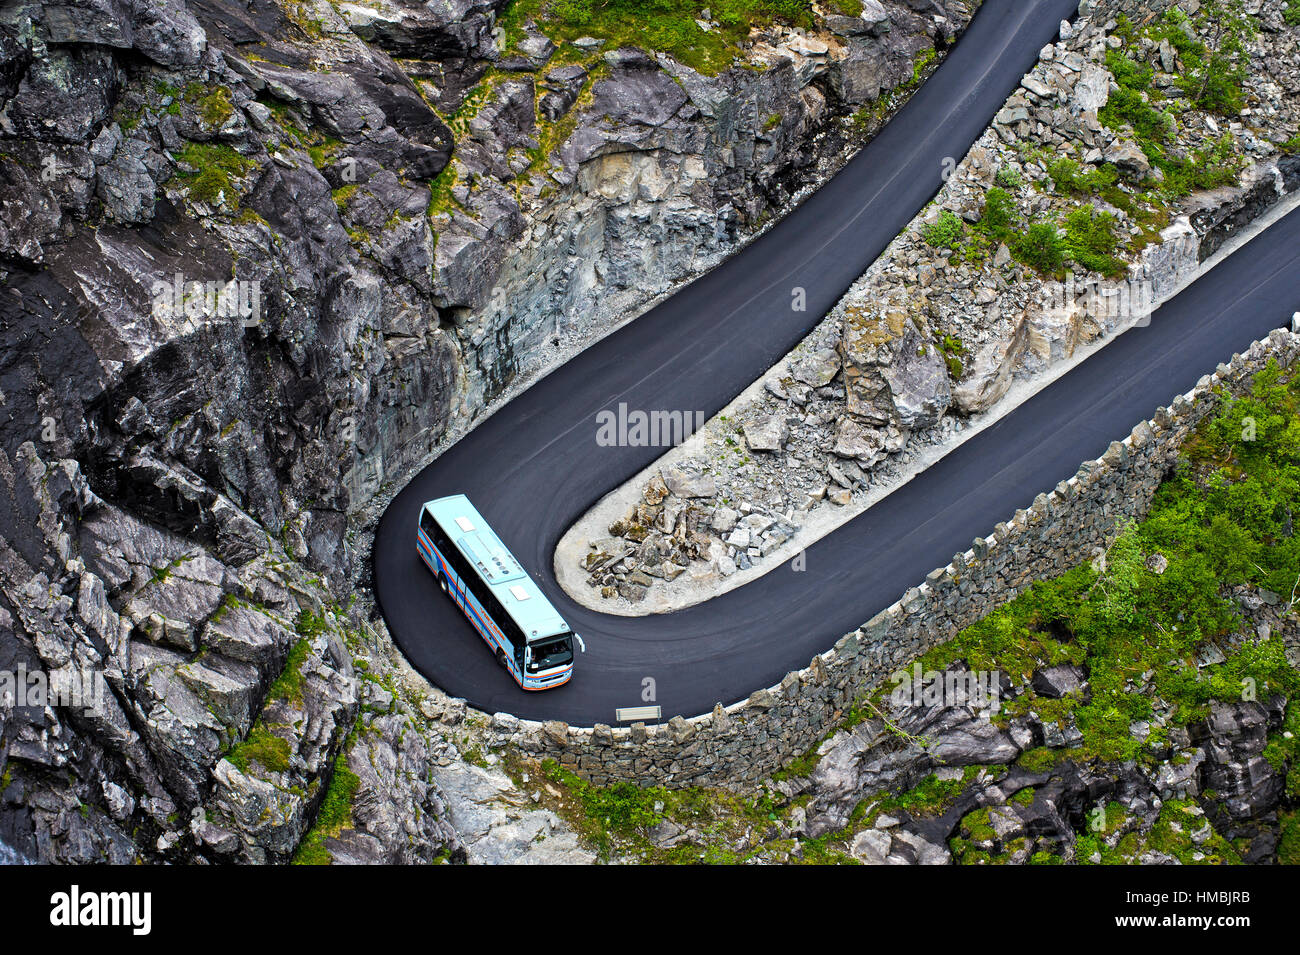 Coach on a mountainous road. Coach in a hairpin bend, hilly road leading to Trollstigen, near Andalsnes, Norway Stock Photo